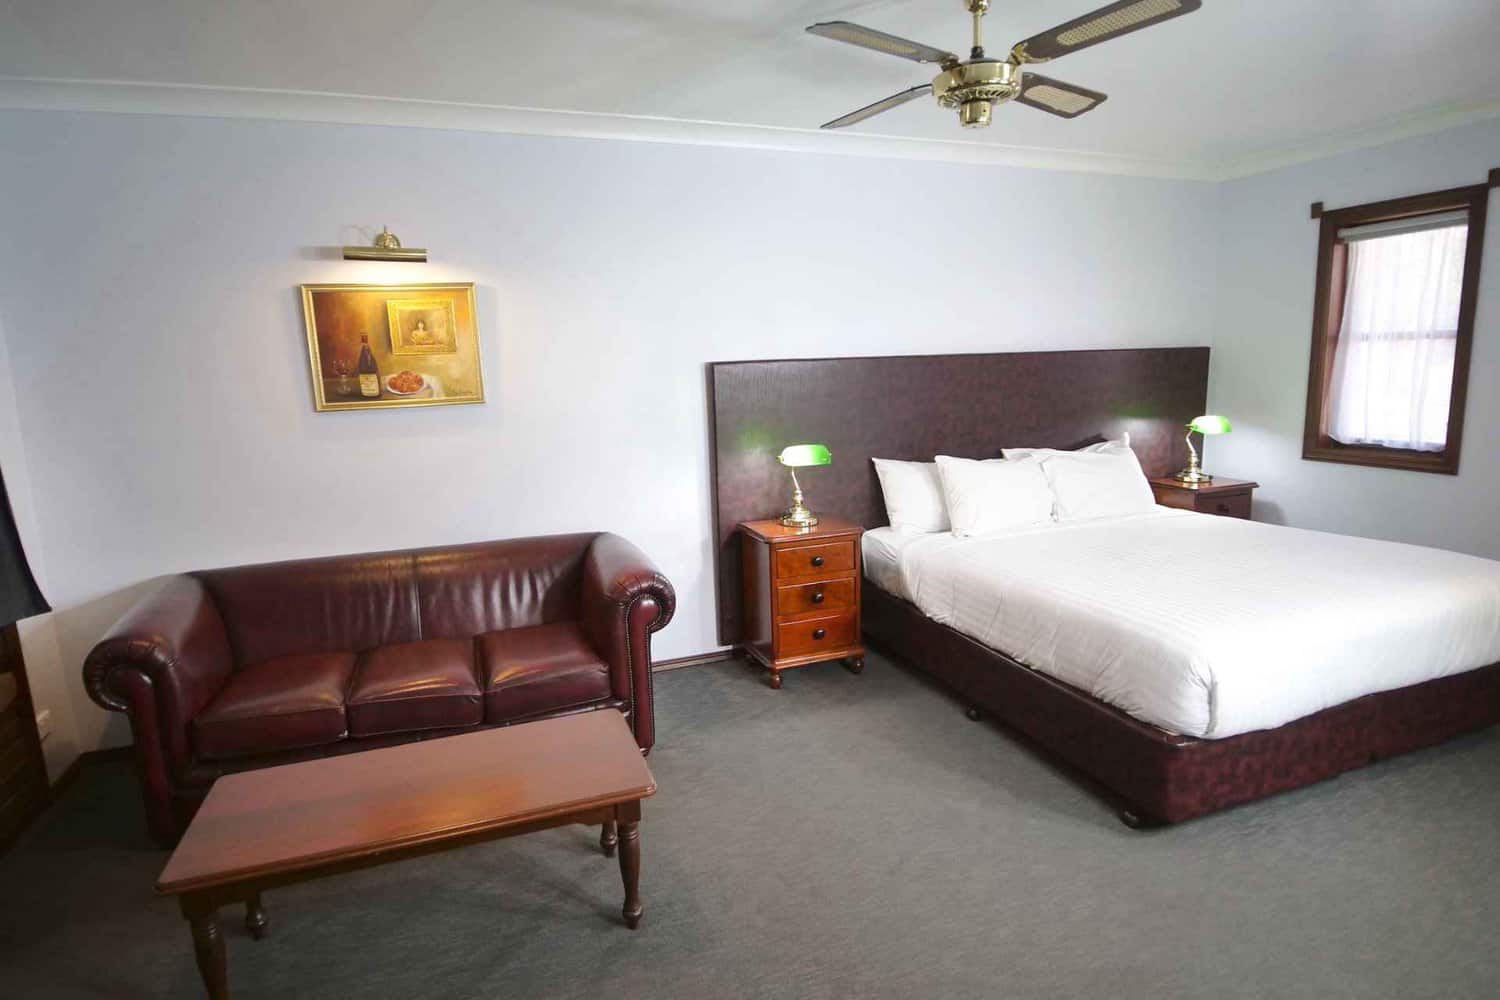 Elegant hotel room featuring a plush king-size bed with an imitation leather bedhead, bedside tables with lamps for cozy lighting, a comfortable couch for lounging, and a tasteful painting of a wine bottle on the wall, creating a warm and inviting atmosphere for guests